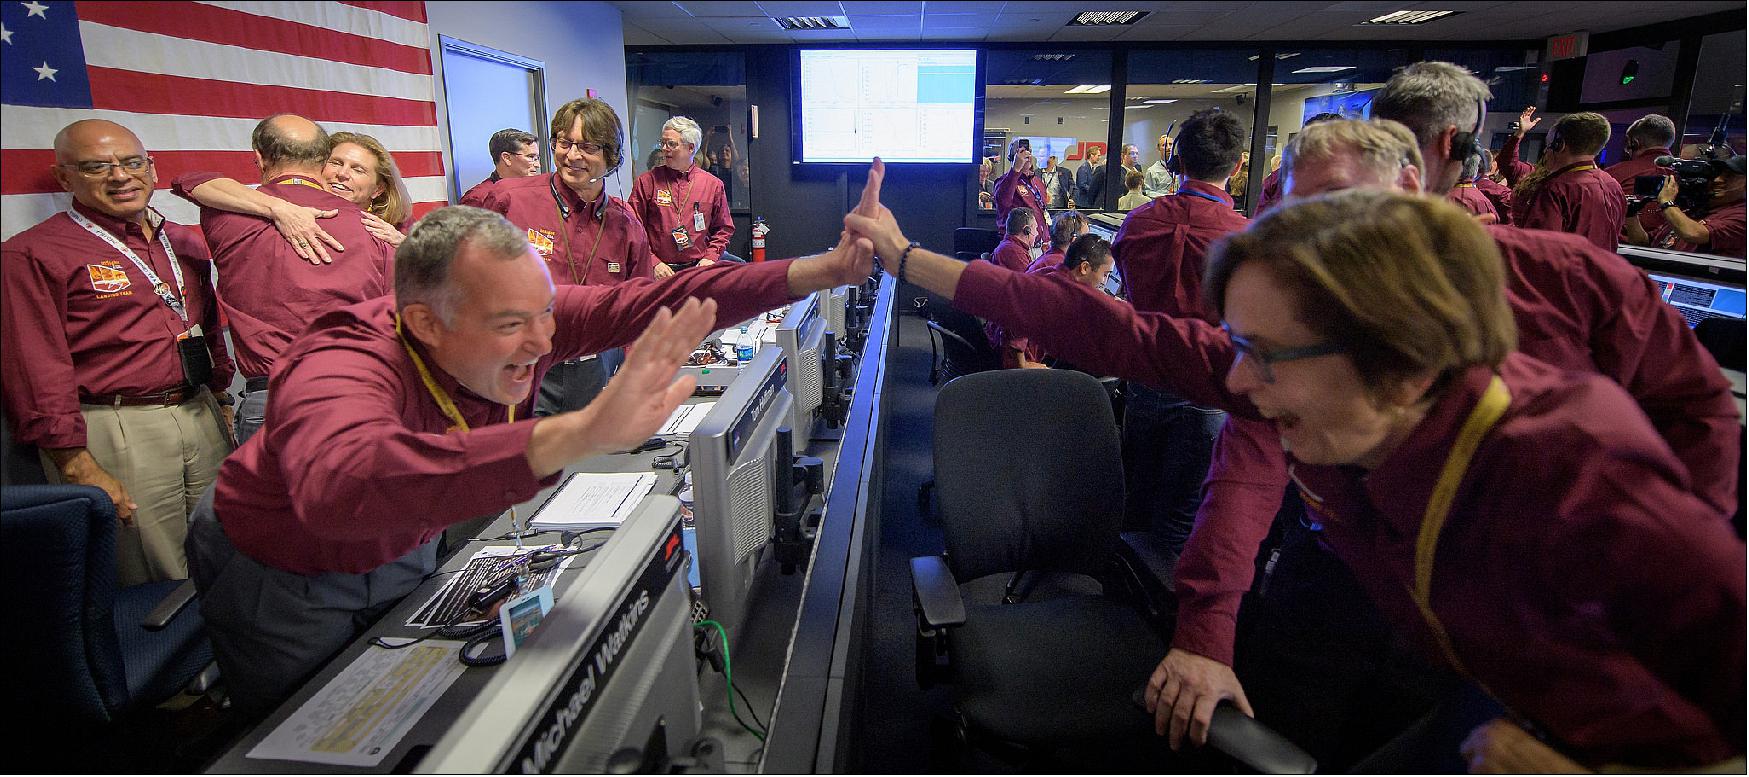 Figure 54: Tom Hoffman, InSight Project Manager, NASA JPL, left, and Sue Smrekar, InSight deputy principal investigator, NASA JPL, react after receiving confirmation that the Mars InSight lander successfully touched down on the surface of Mars, Monday, Nov. 26, 2018 inside the Mission Support Area at NASA's Jet Propulsion Laboratory in Pasadena, California (image credit: NASA, Bill Ingalls)